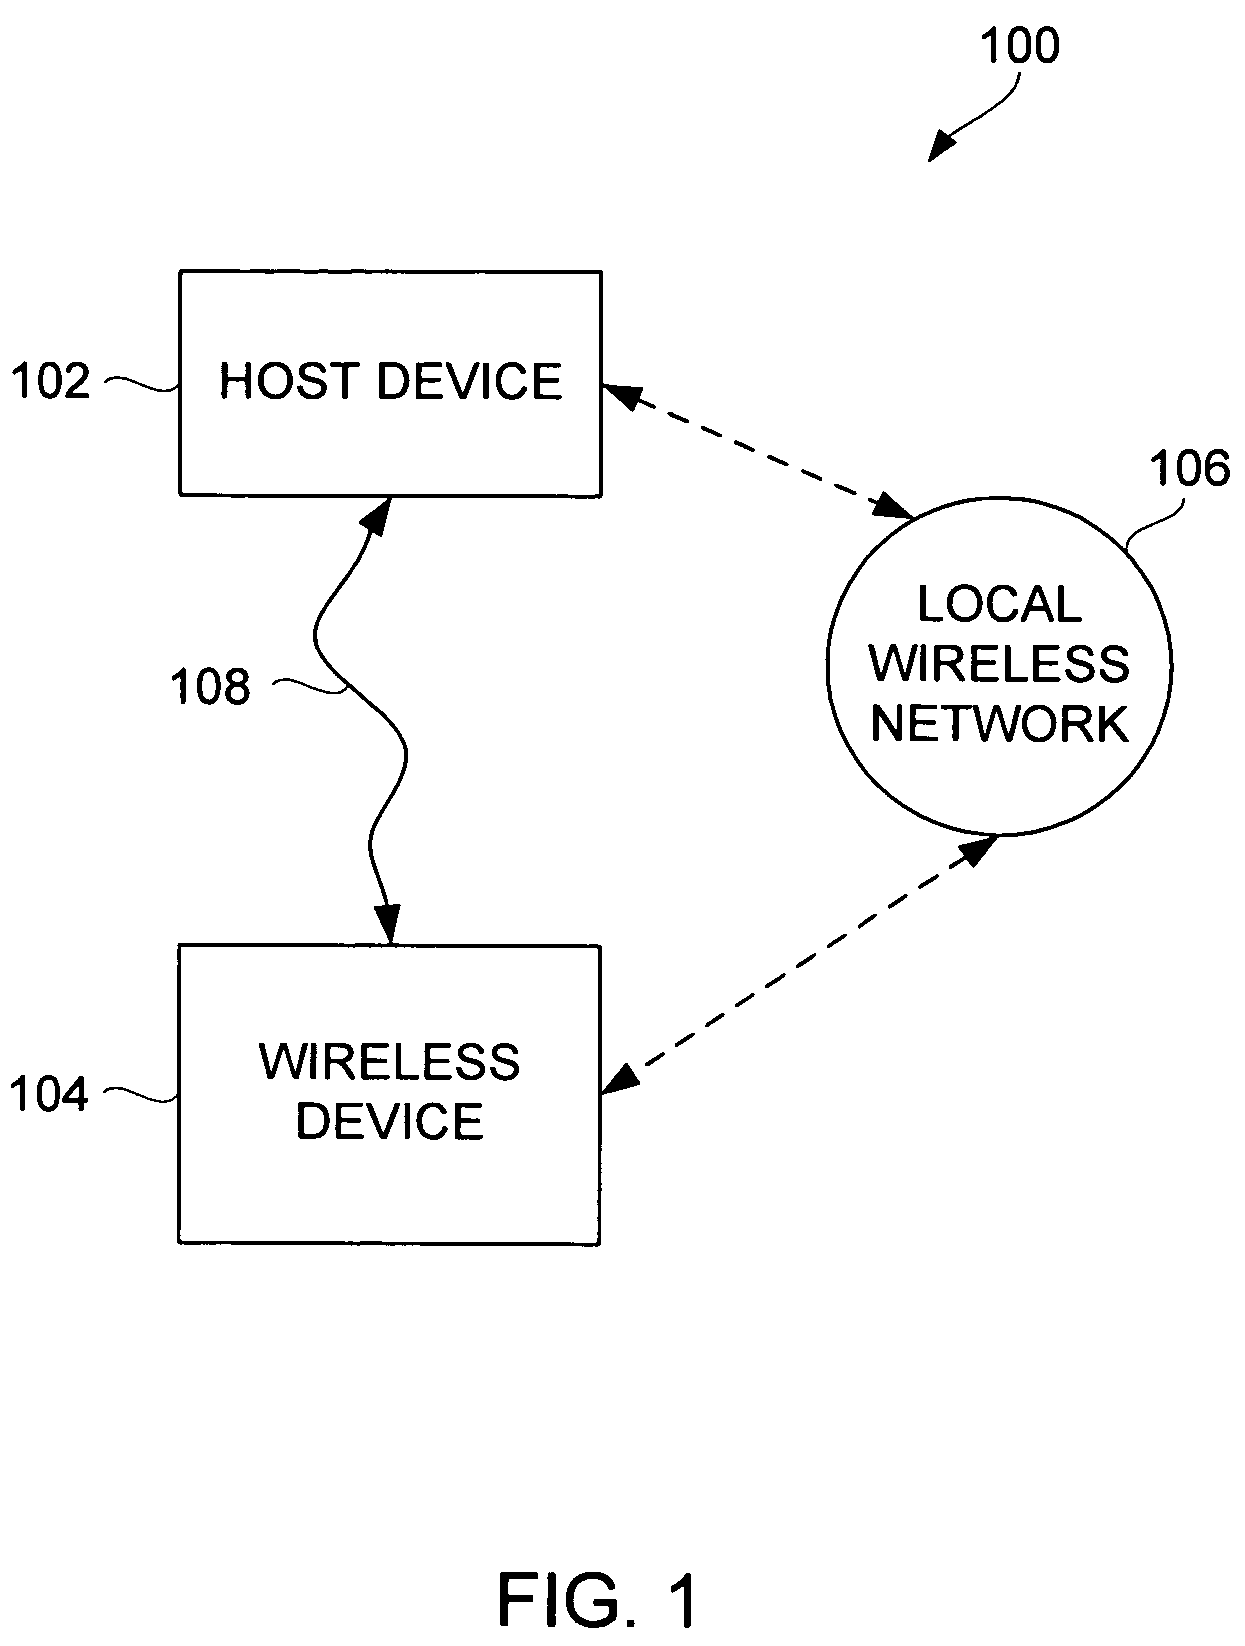 Pairing of wireless devices using a wired medium